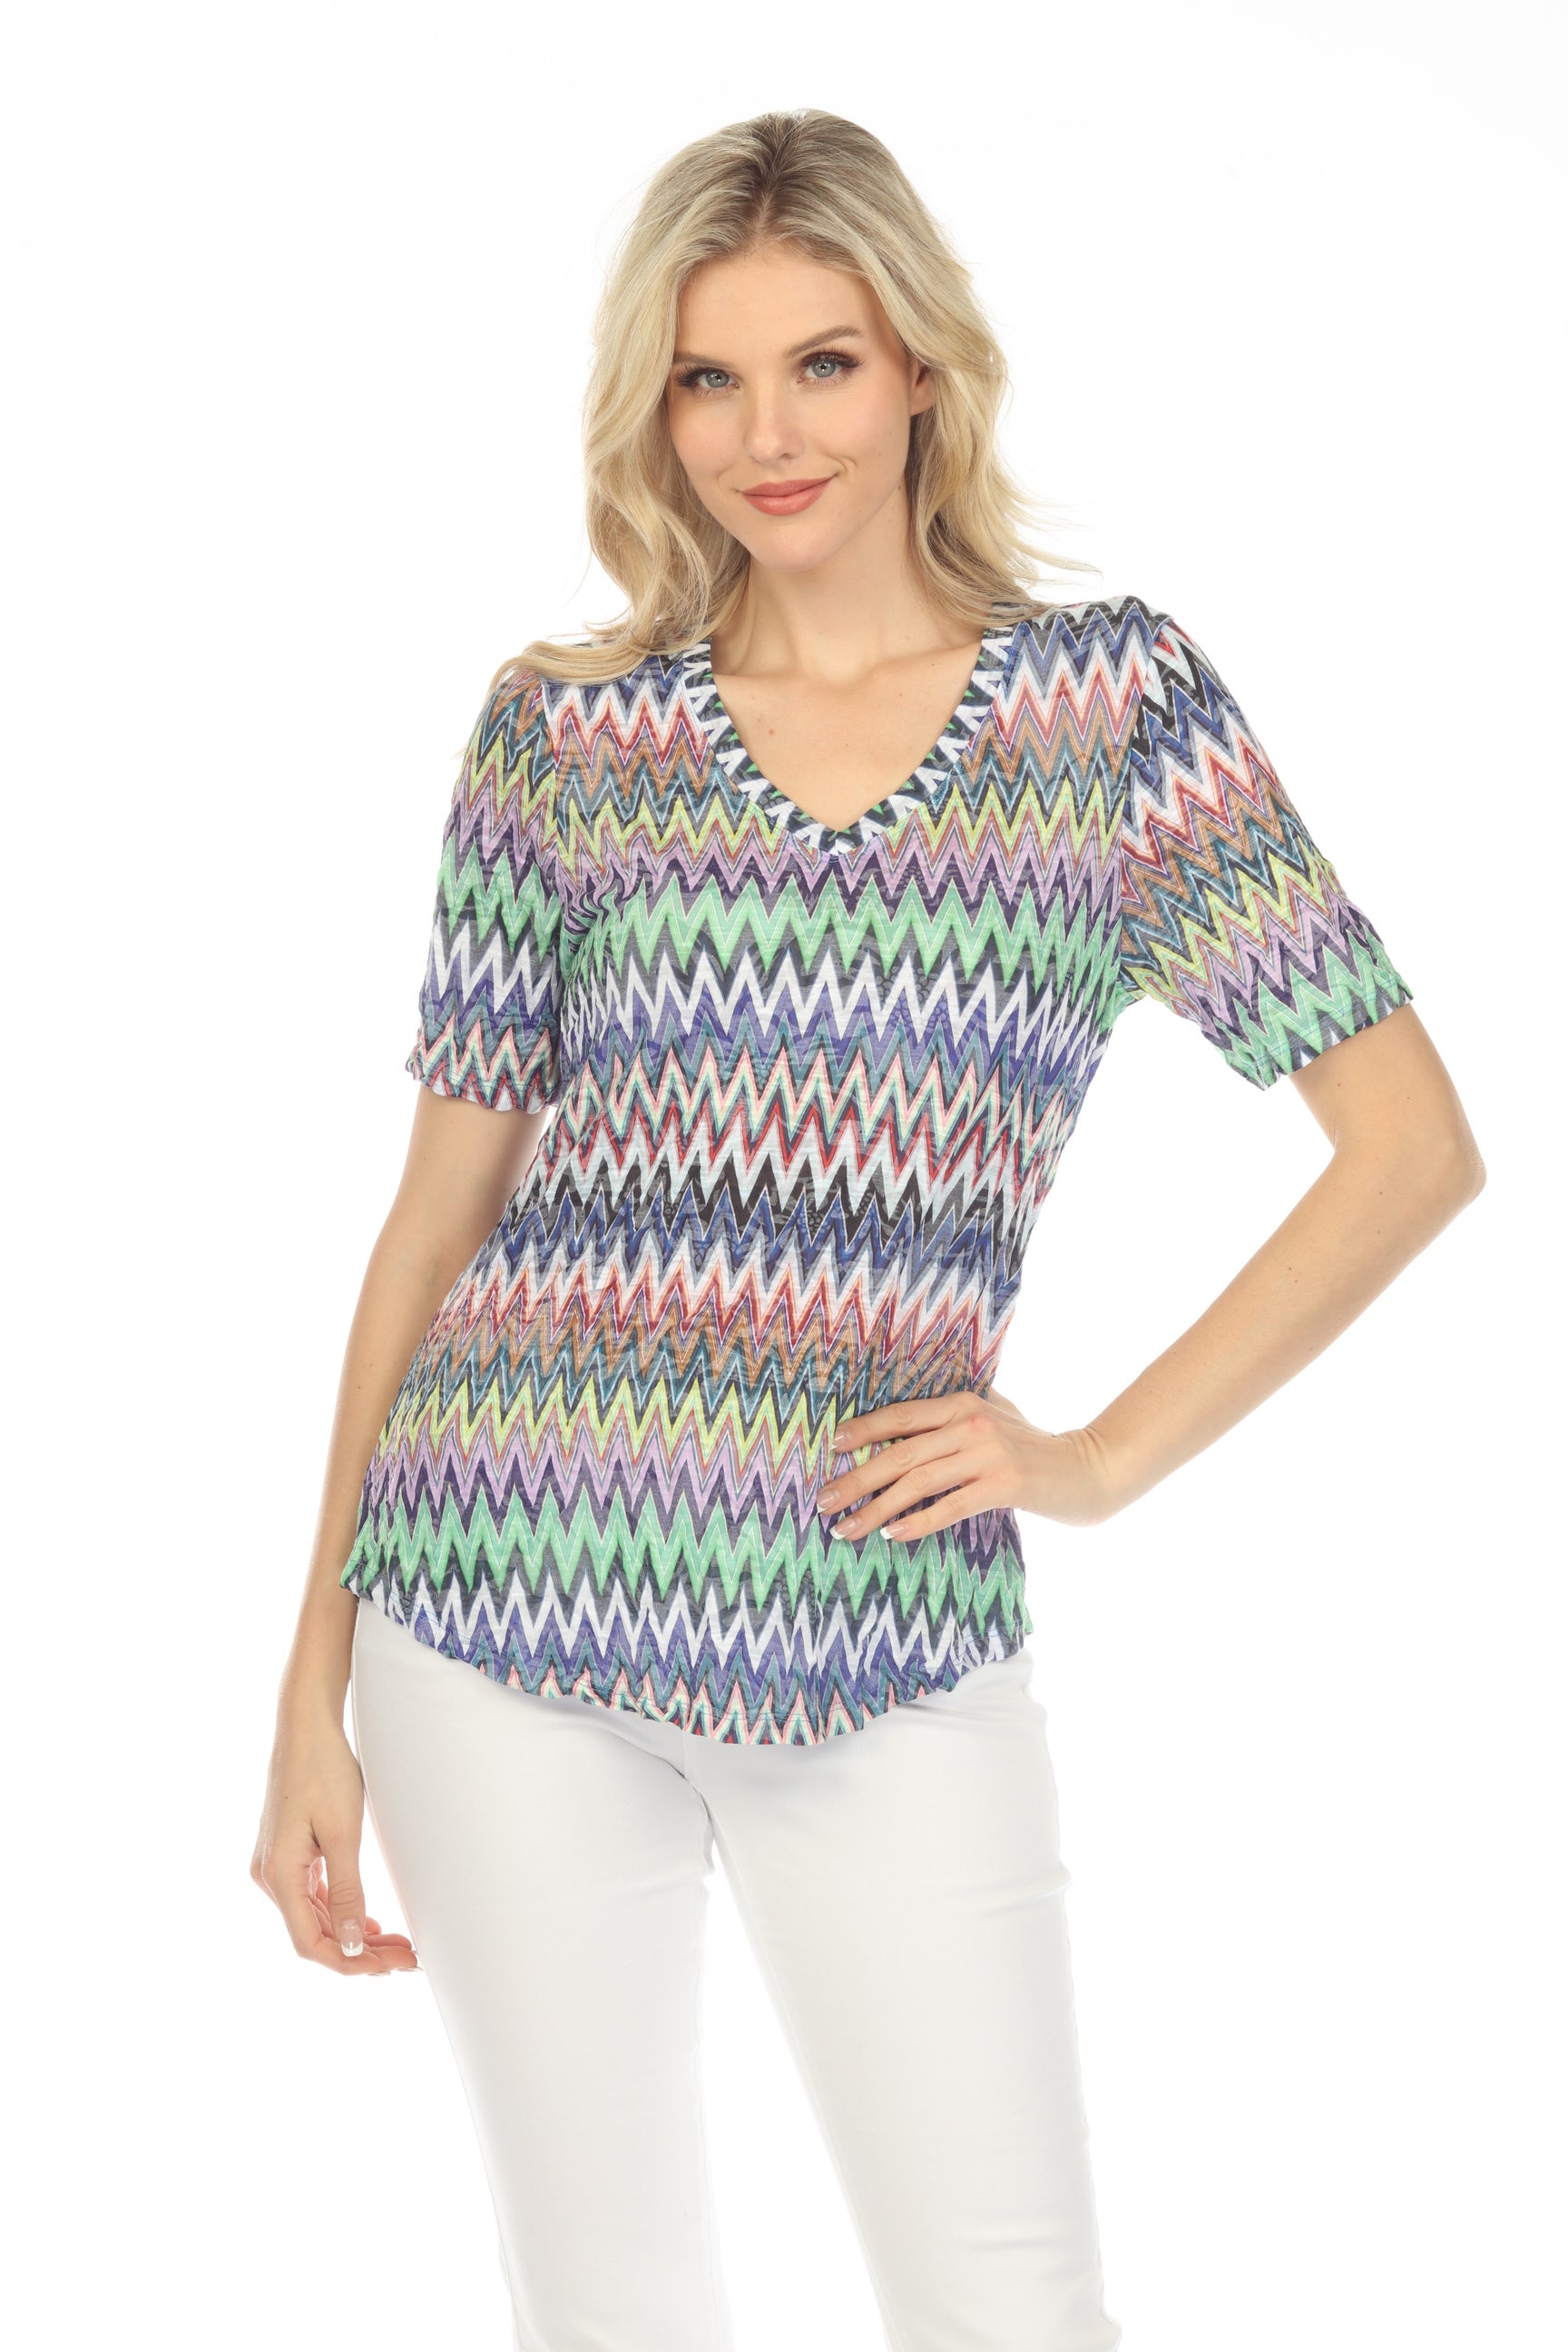 S/S V-Neck Top - Zigzags - CARINE